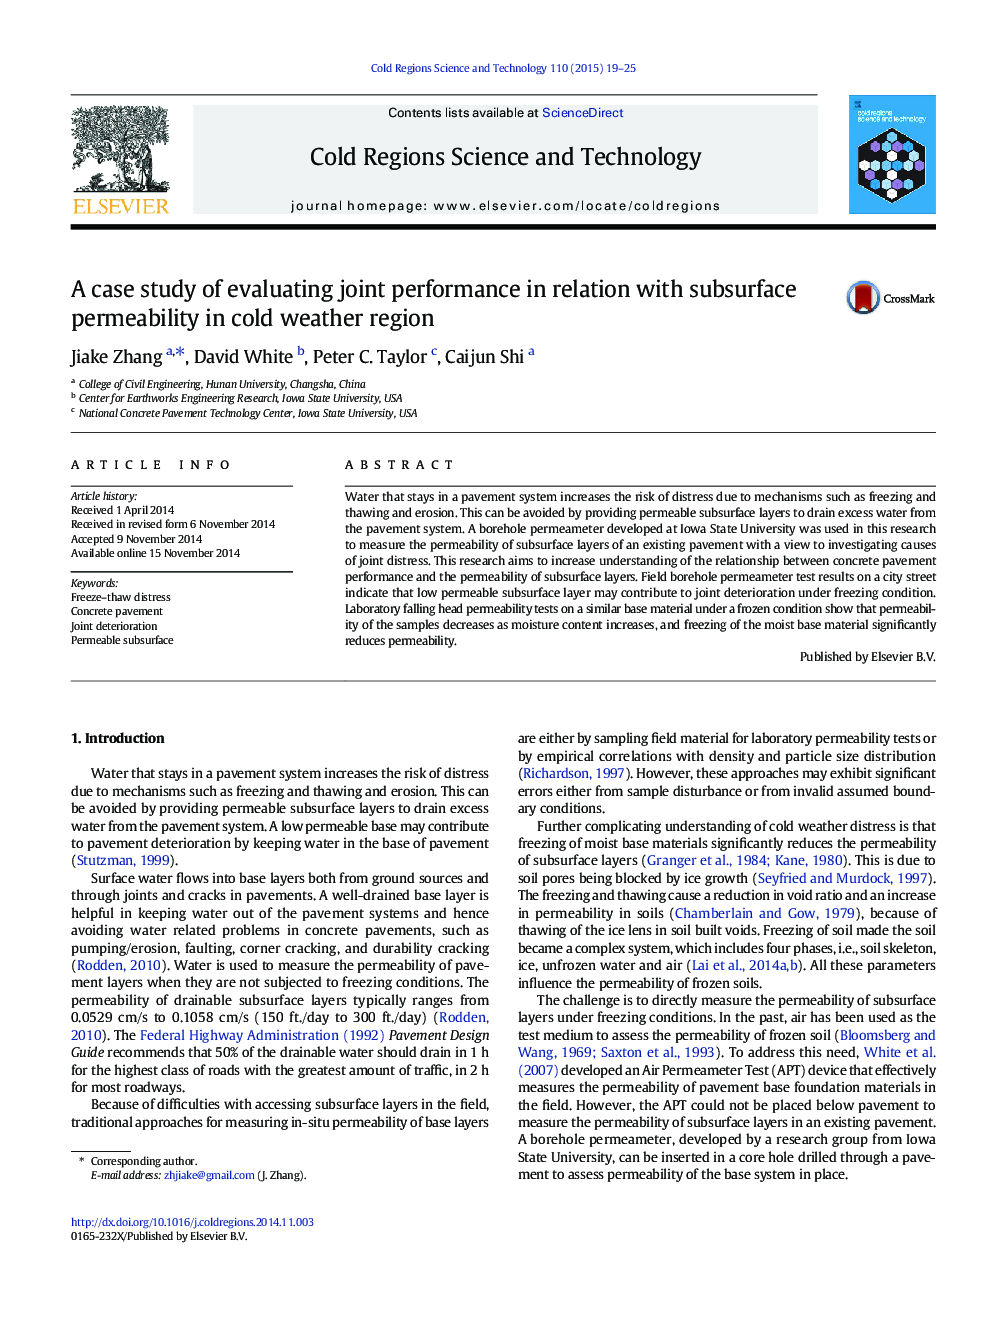 A case study of evaluating joint performance in relation with subsurface permeability in cold weather region